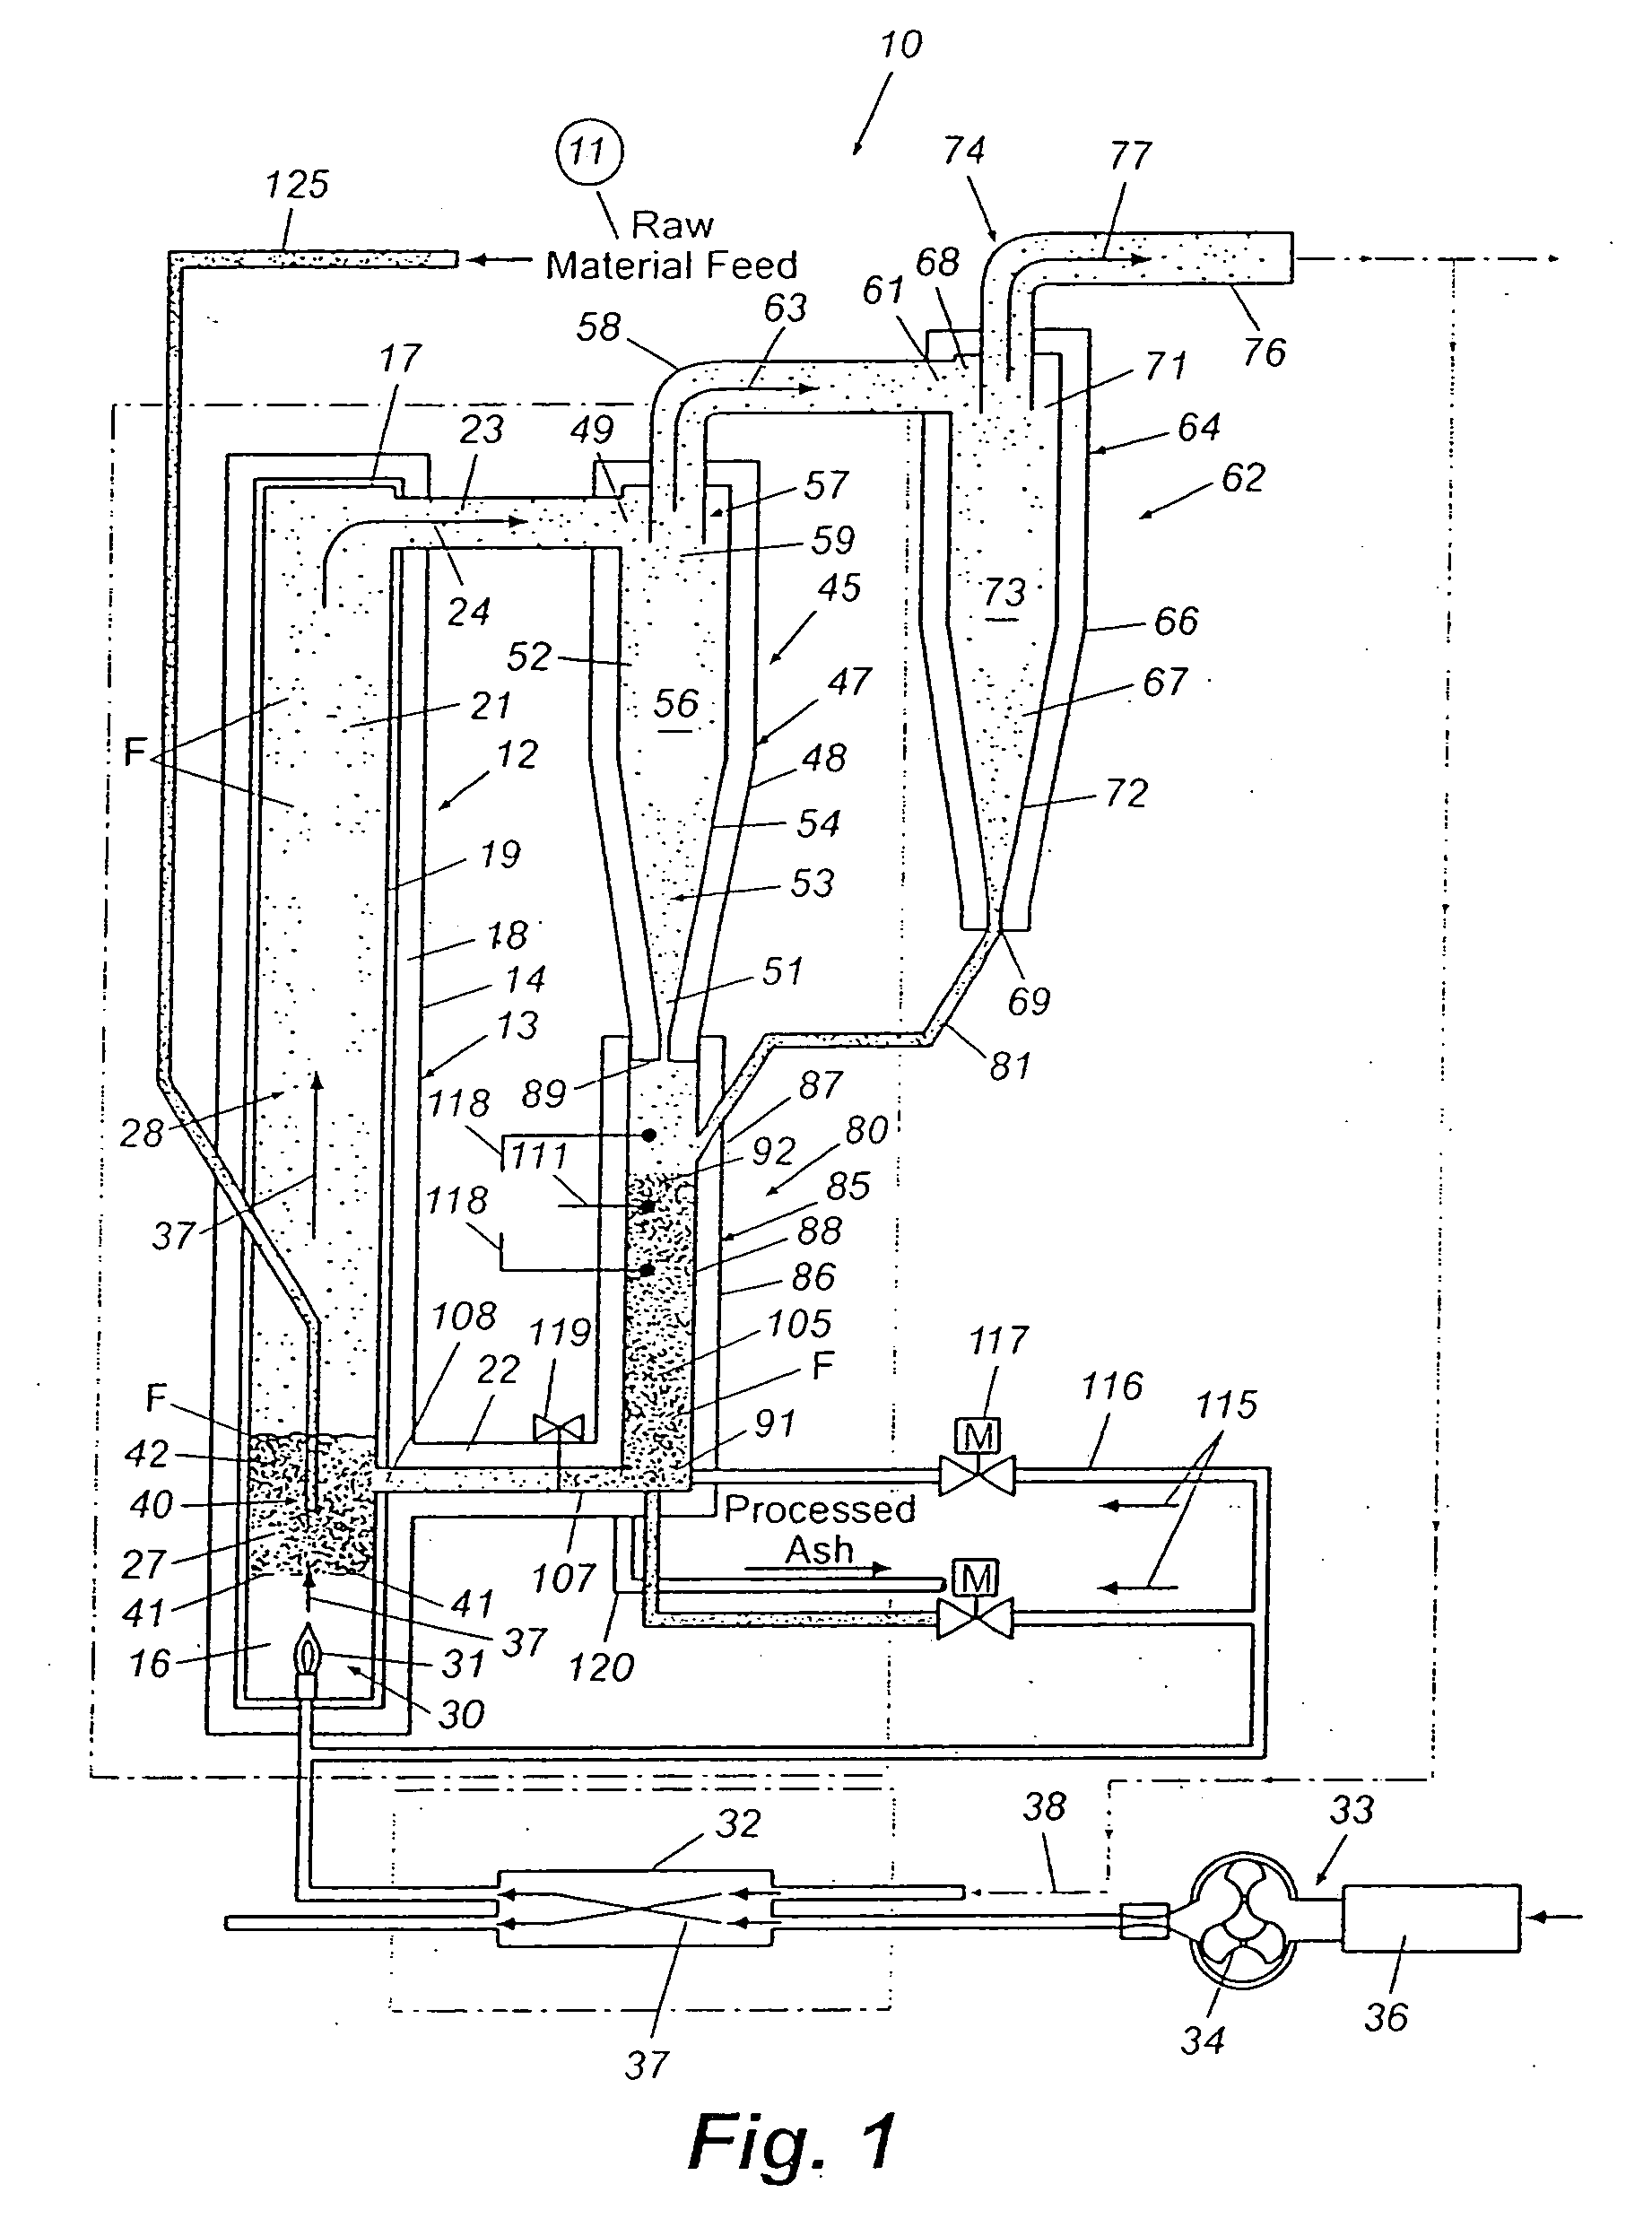 Method and apparatus for combustion of residual carbon in fly ash